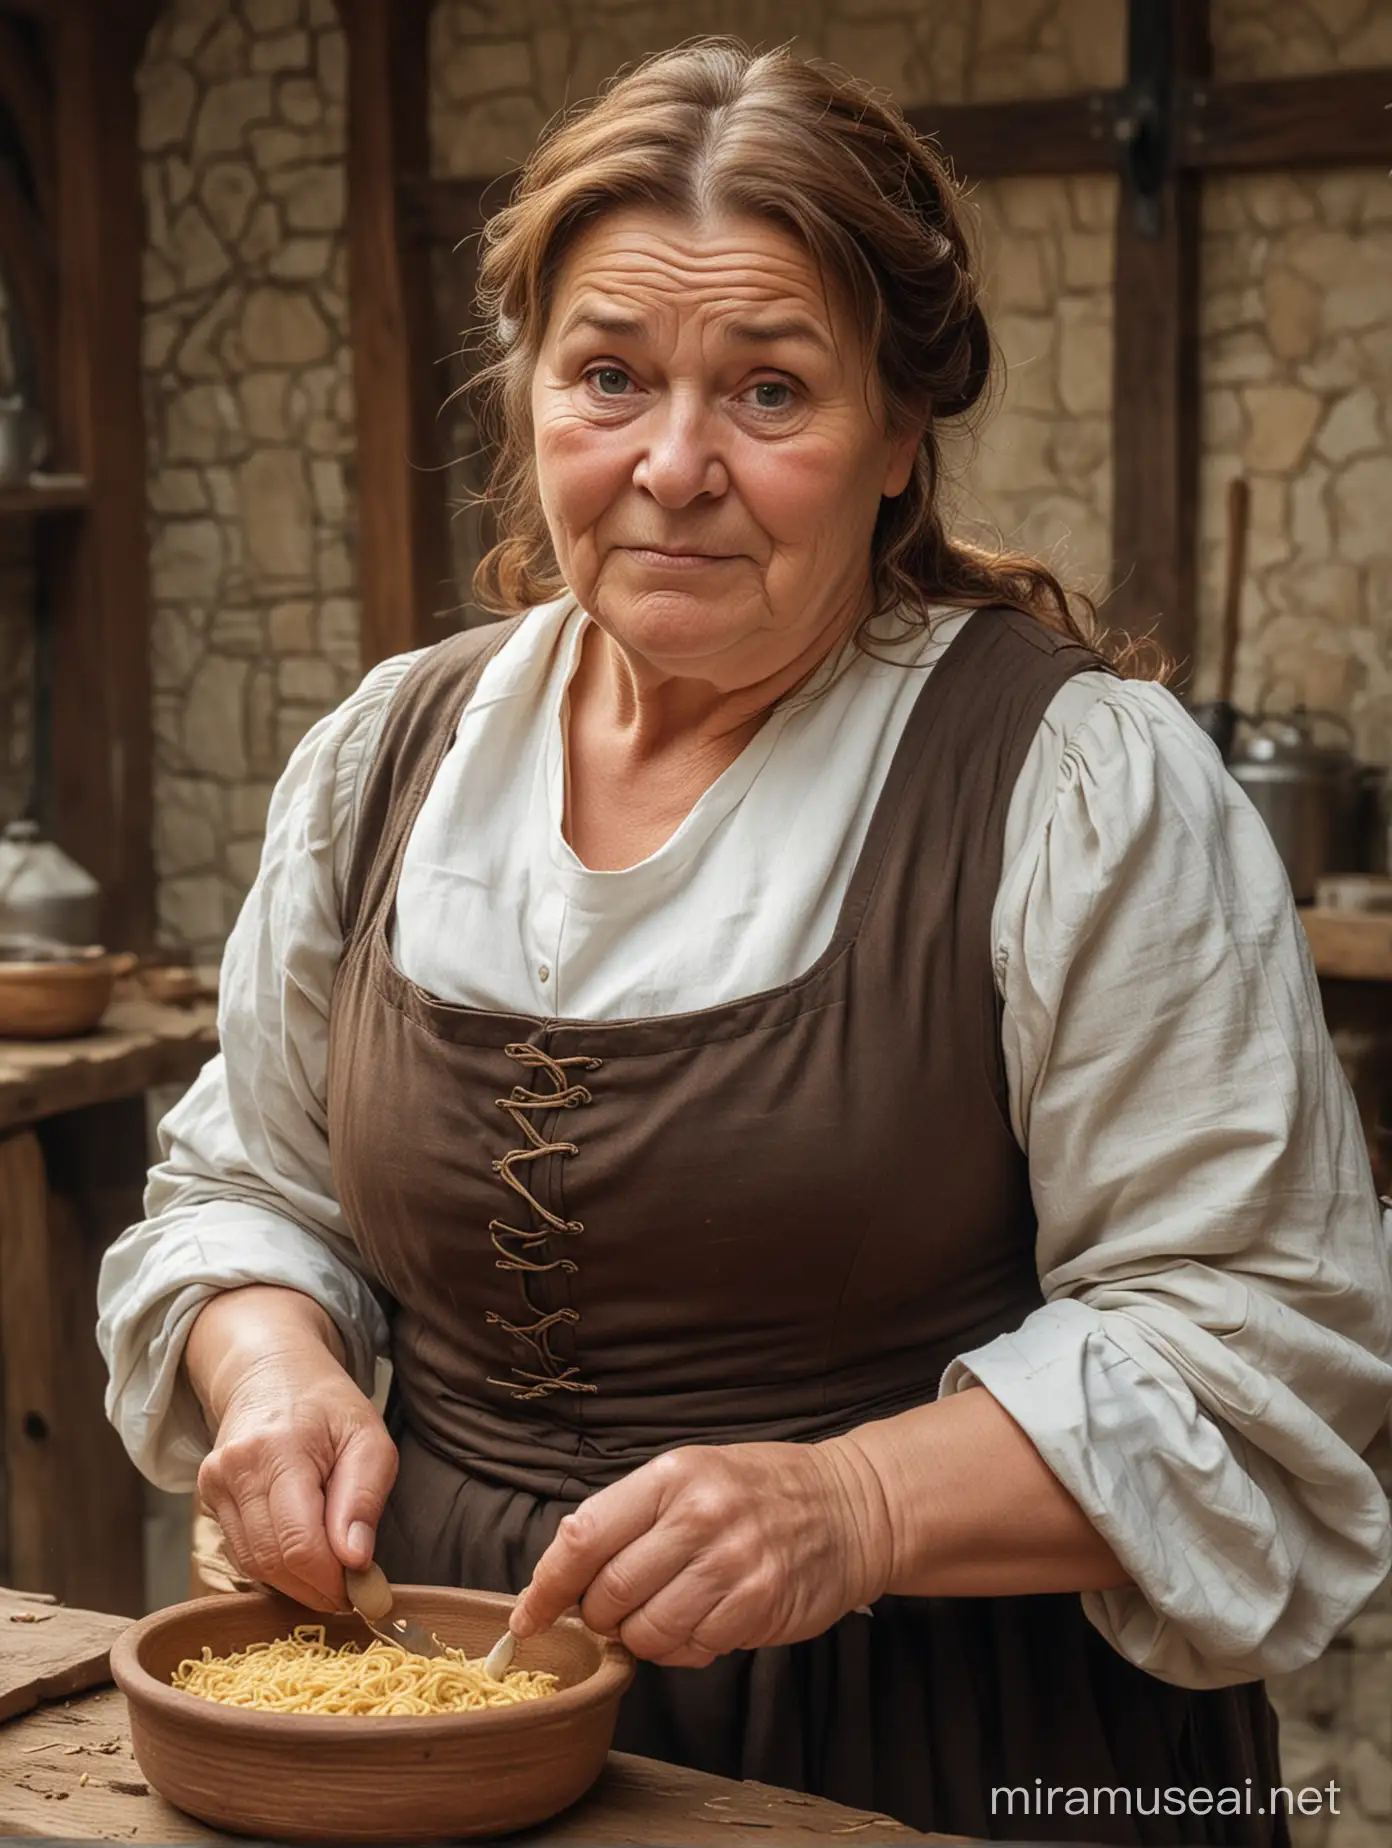 Medieval Old Cook with Robust Build and Brown Hair